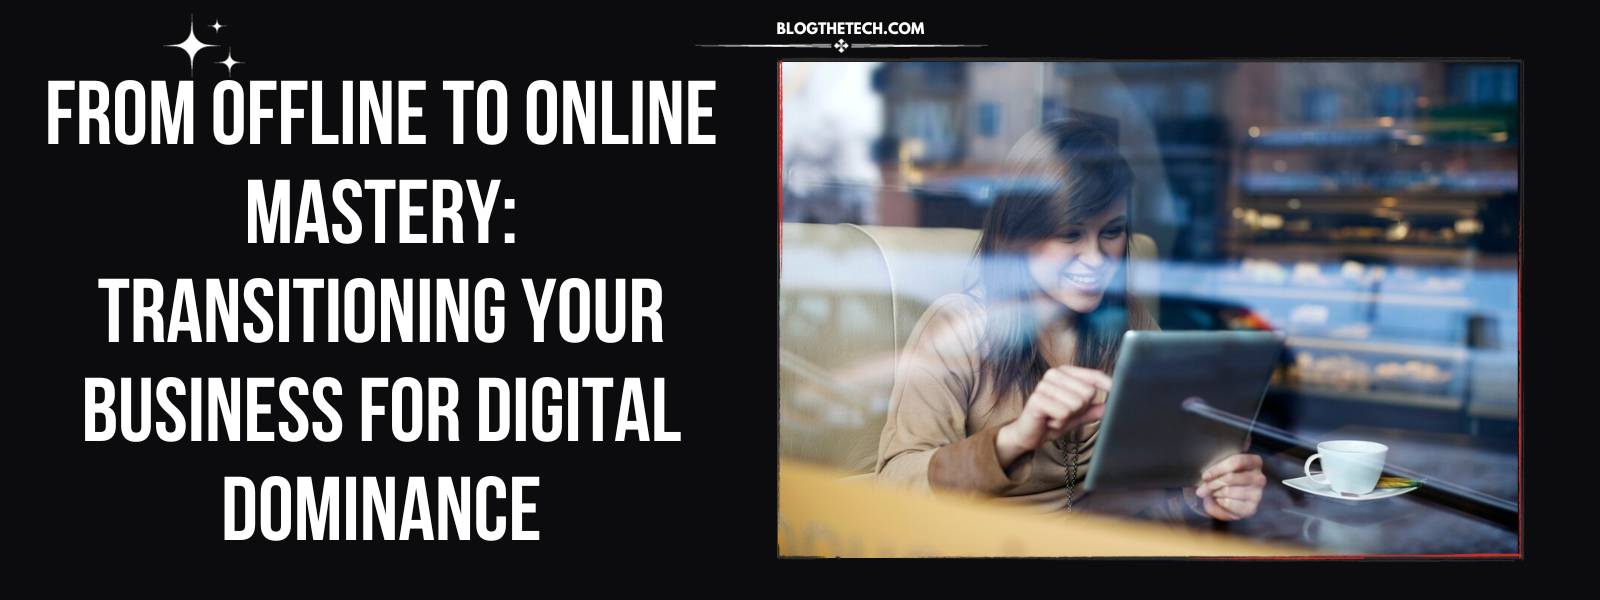 How To Transition Offline Business For Digital Dominance